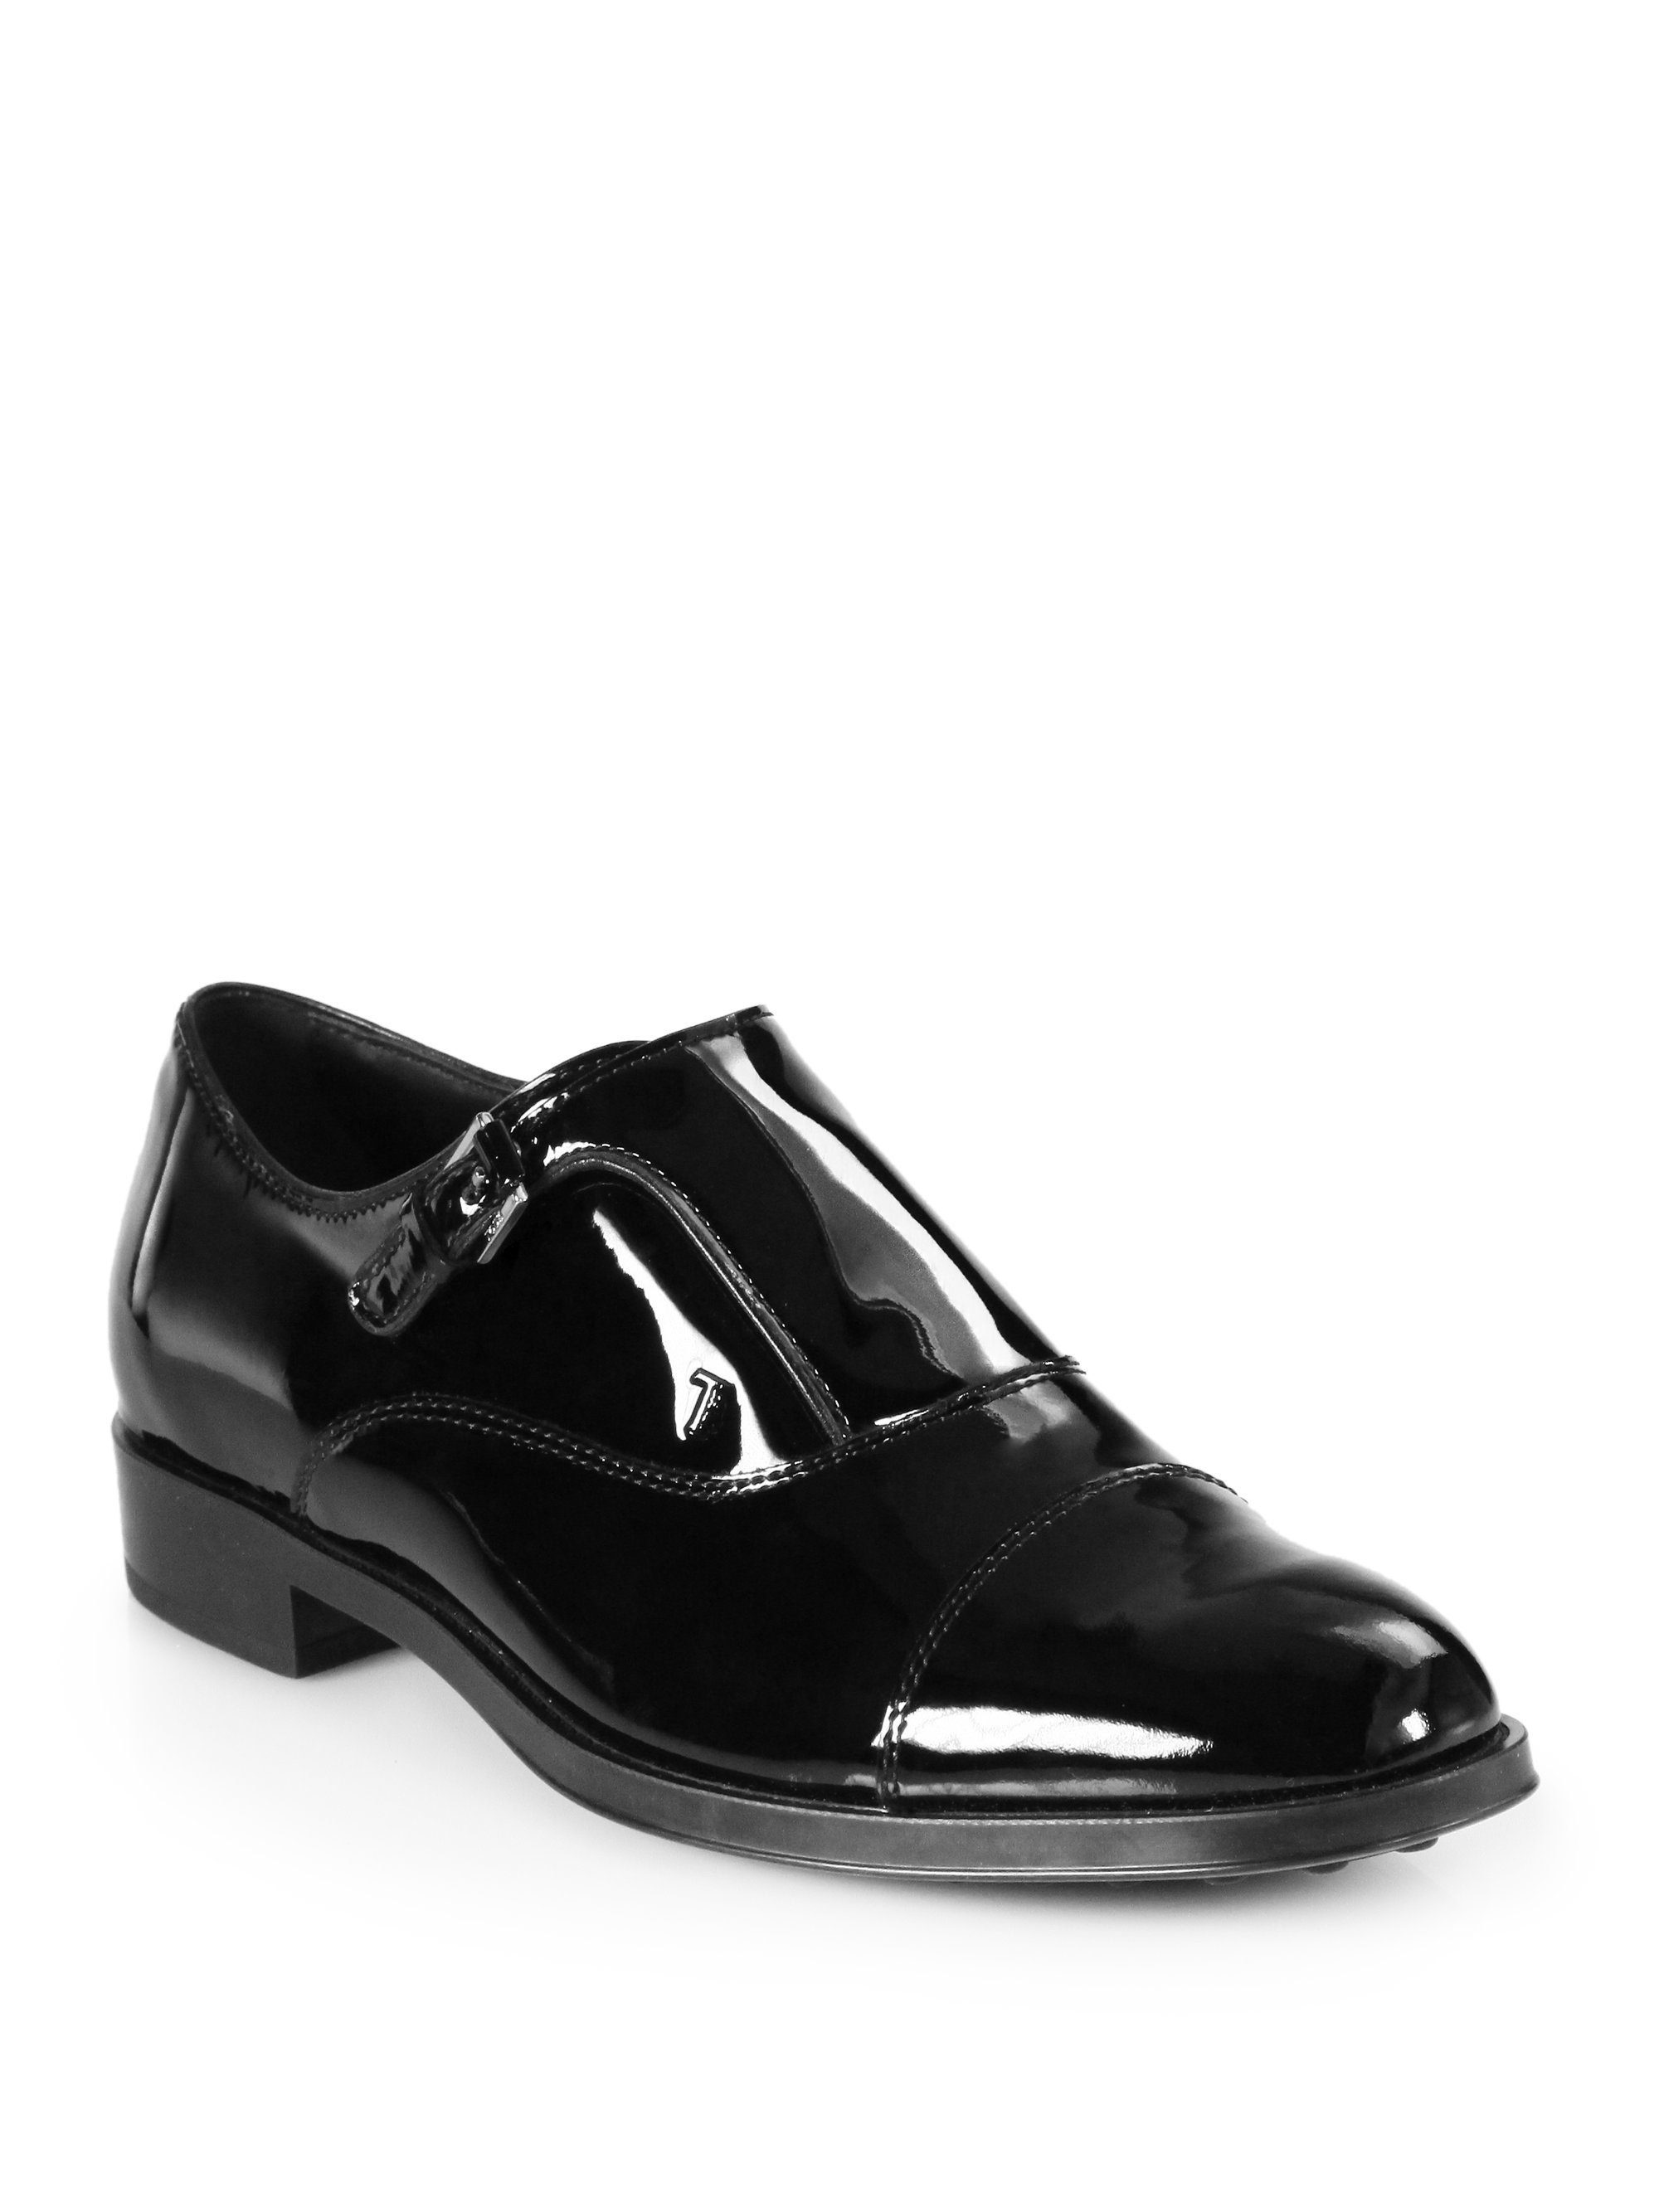 Tod's Patent Leather Monk Strap Loafers in Black | Lyst